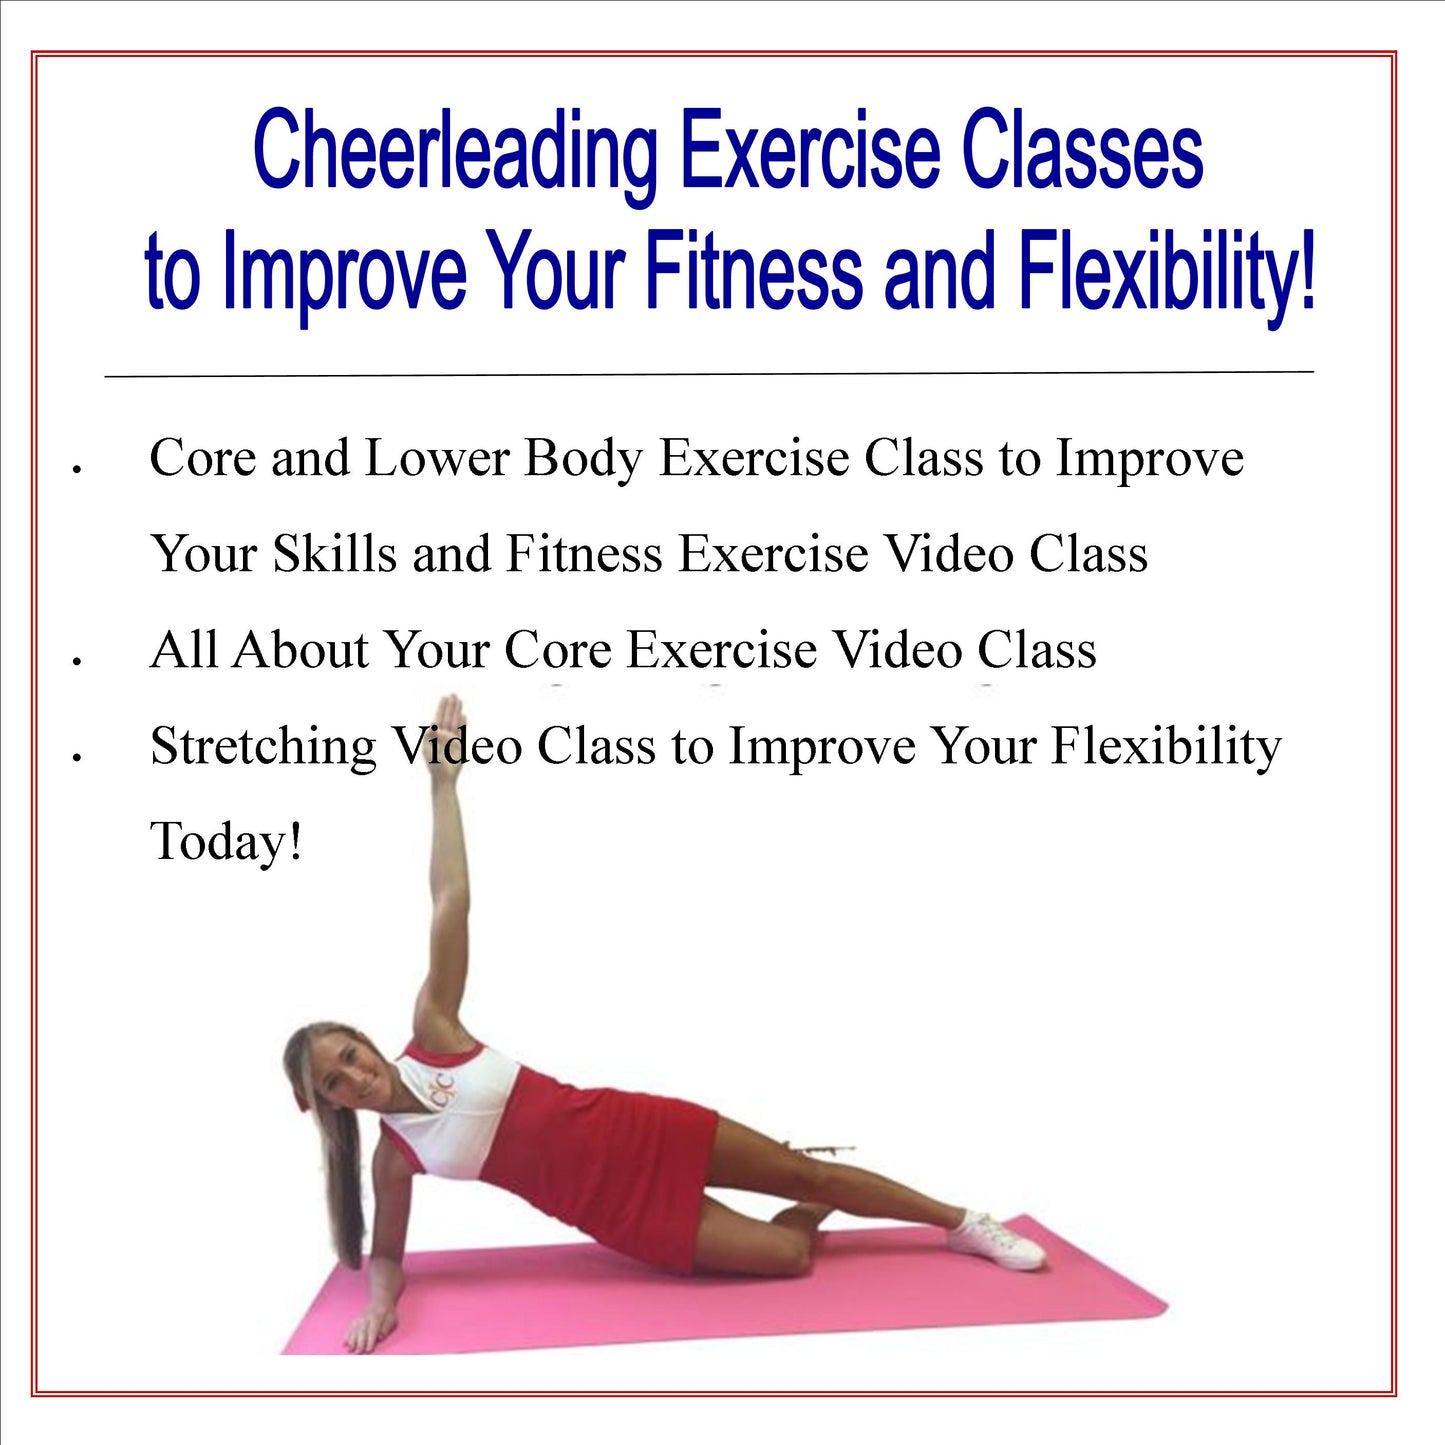 Exercises Classes to Improve Your Fitness and Your Flexibility